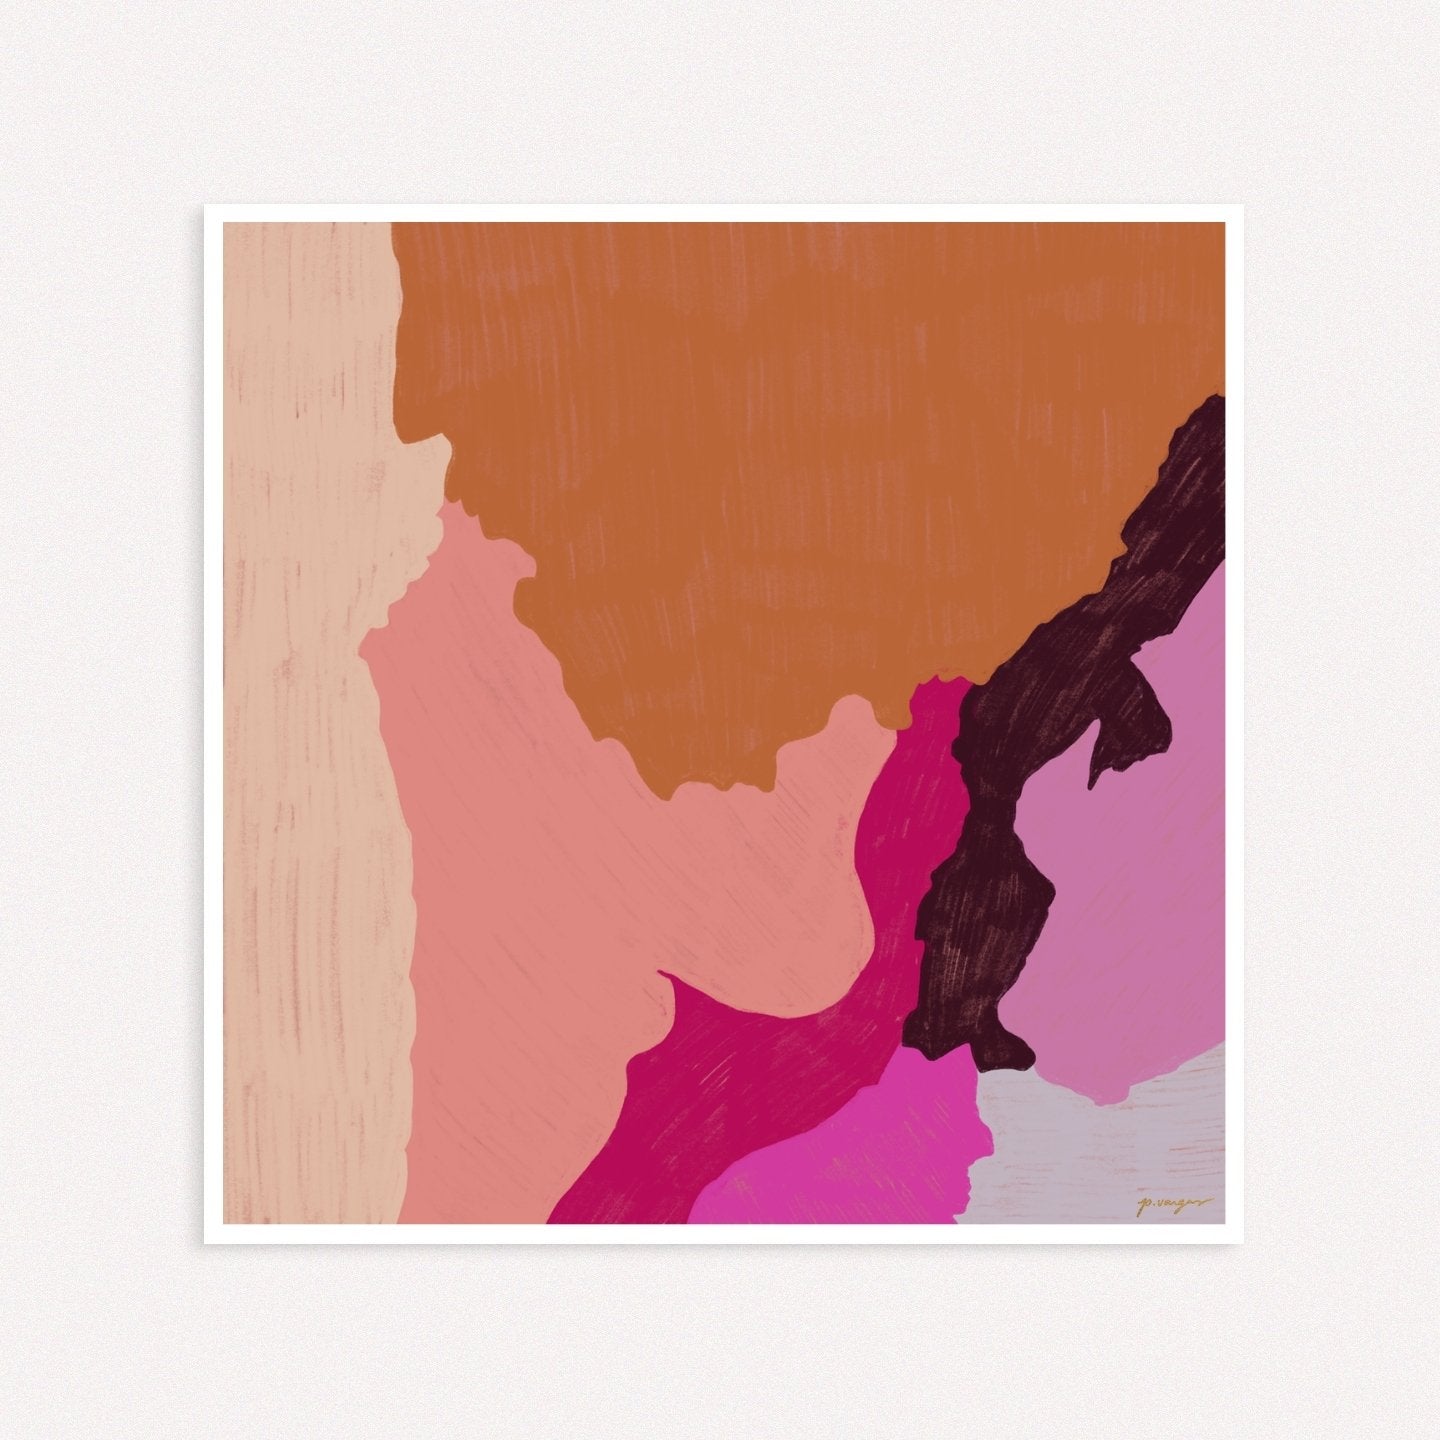 Color Field No.8, pink and brown colorful abstract wall art print by Parima Studio